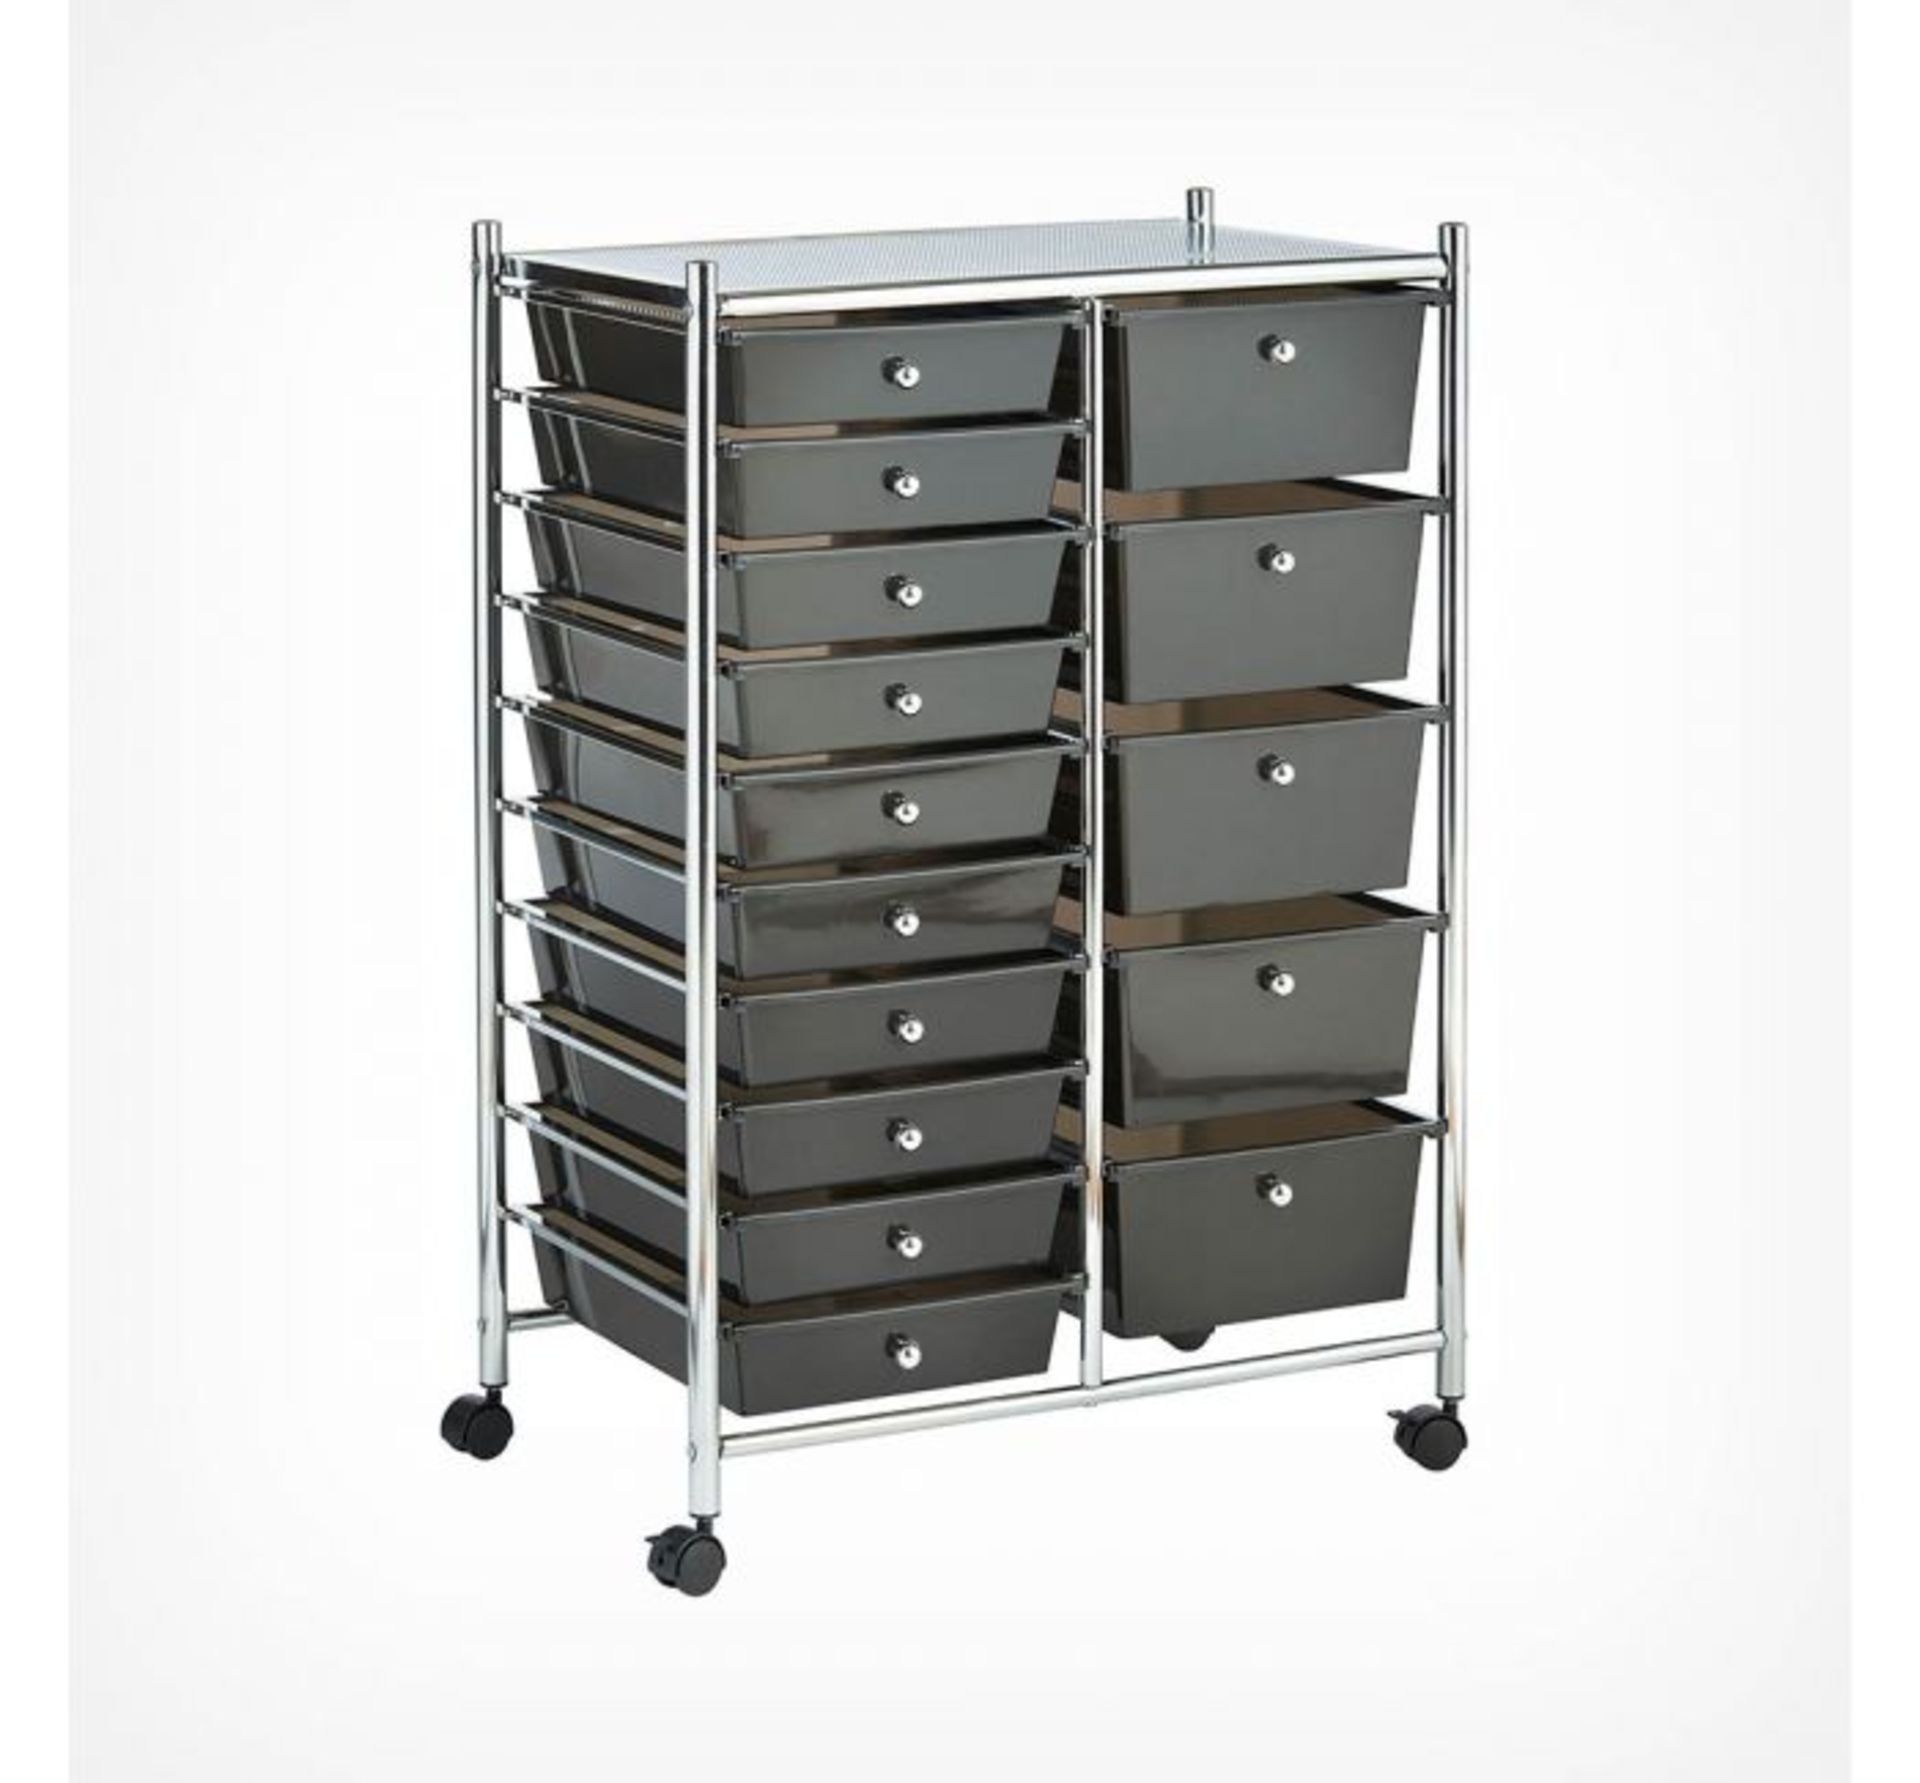 (HZ67) Black 15 Drawer Trolley Perfect for homes, offices, beauty salons, hairdressers and mor... - Image 2 of 3